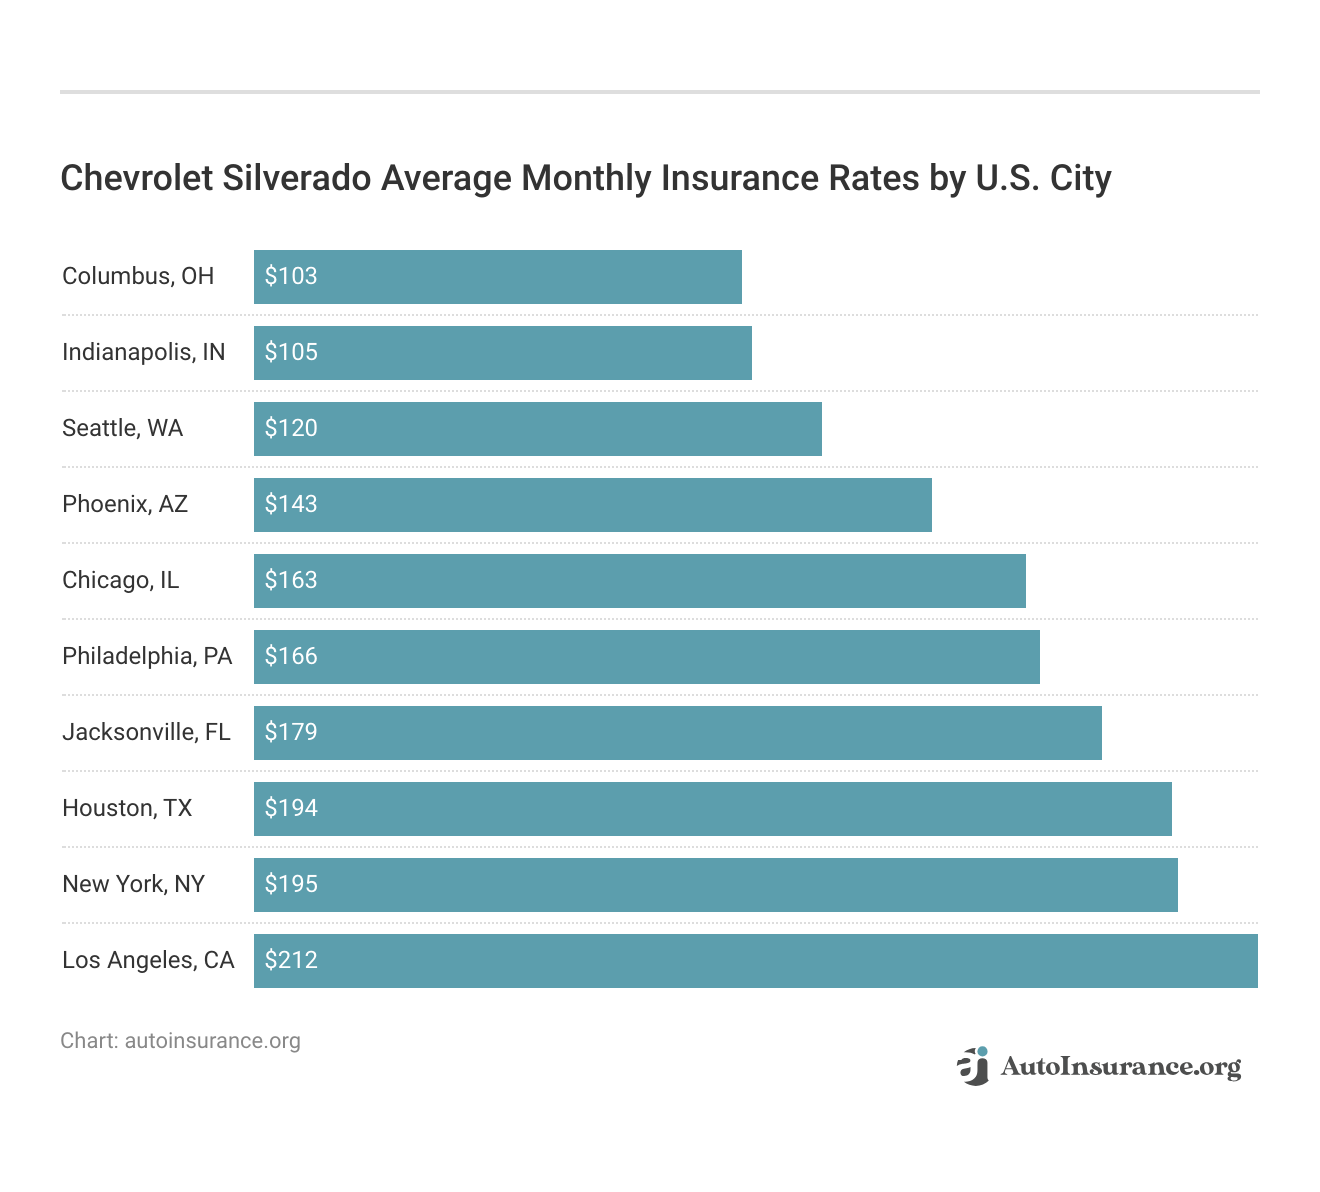 <h3>Chevrolet Silverado Average Monthly Insurance Rates by U.S. City</h3>